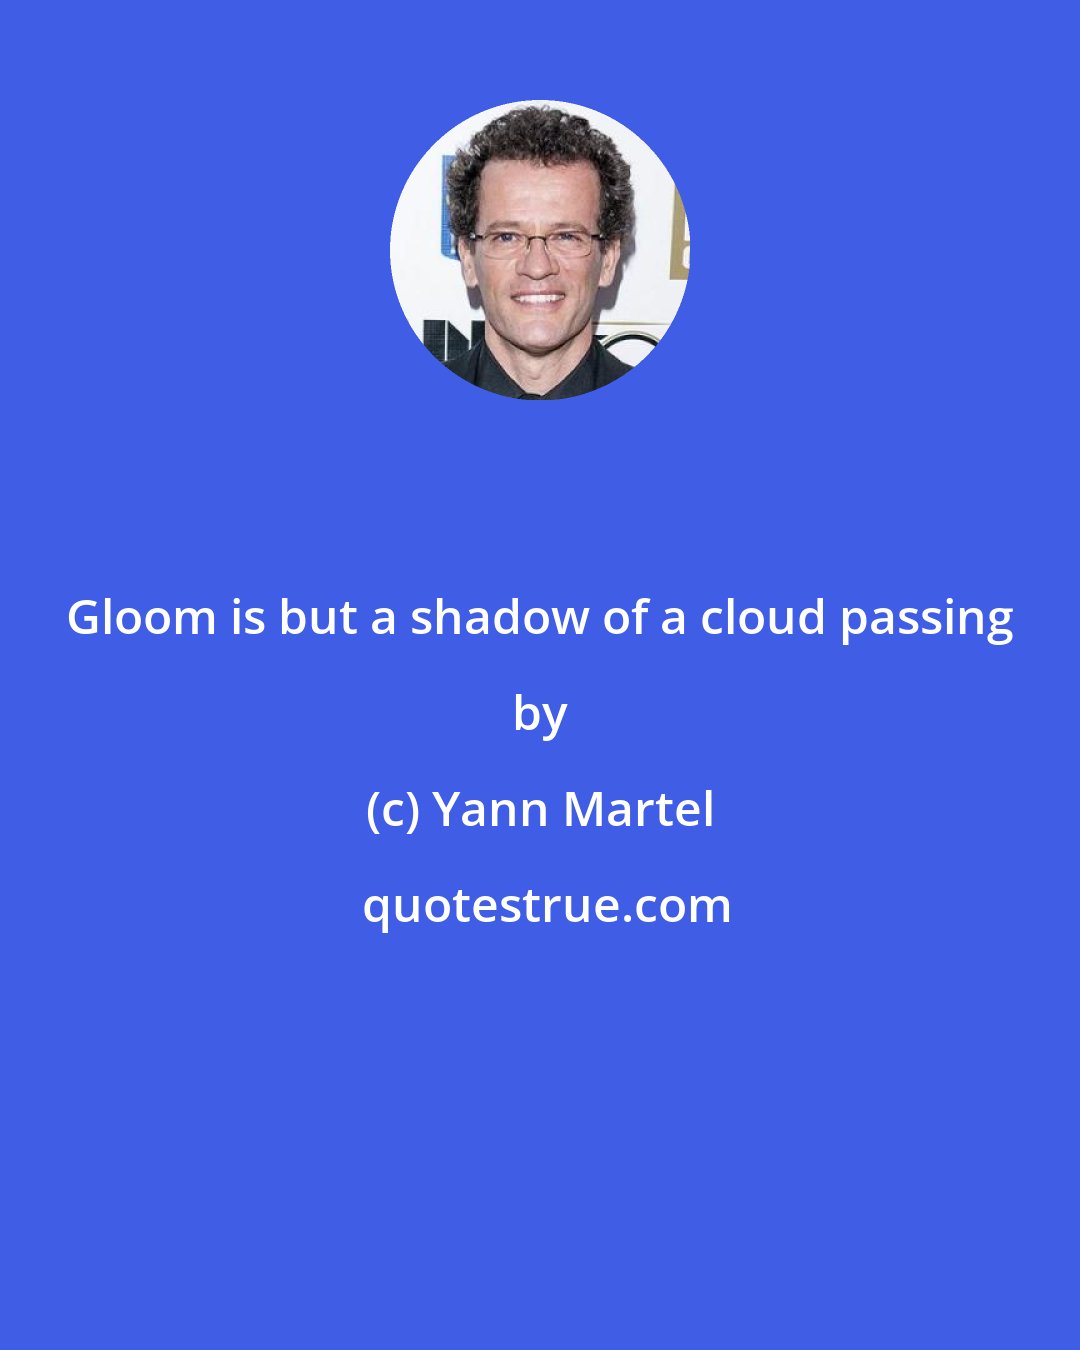 Yann Martel: Gloom is but a shadow of a cloud passing by